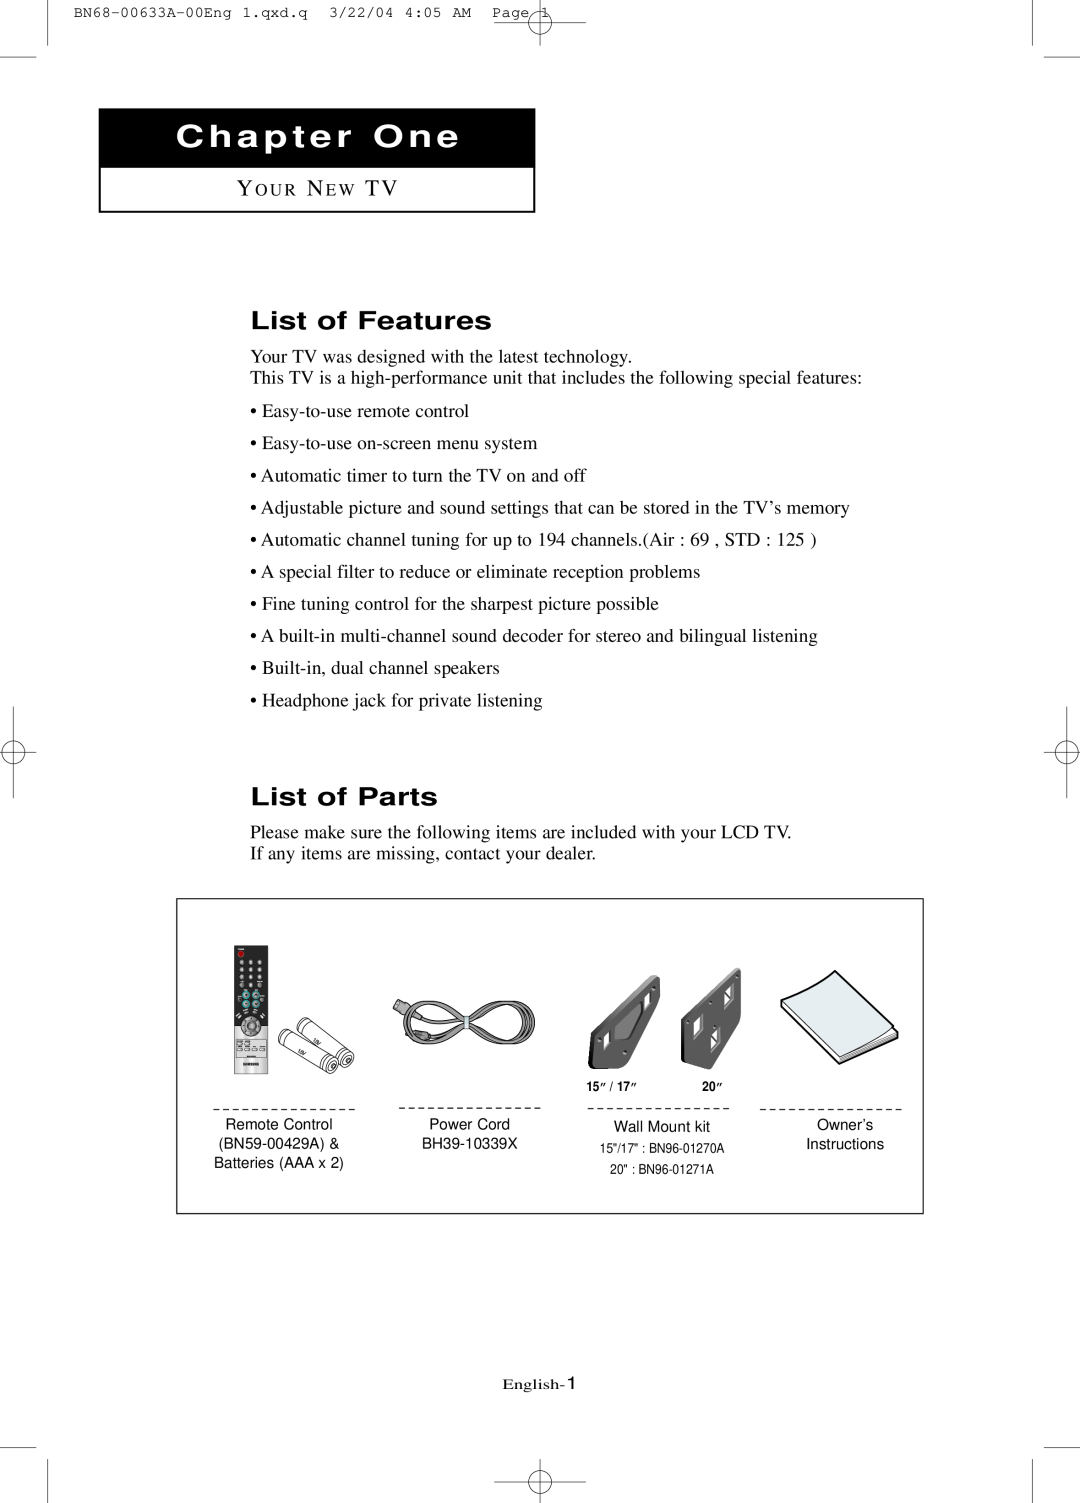 Samsung LT-P 1545, LT-P 1745, LT-P 2045 manual Chapter One, List of Features, List of Parts 